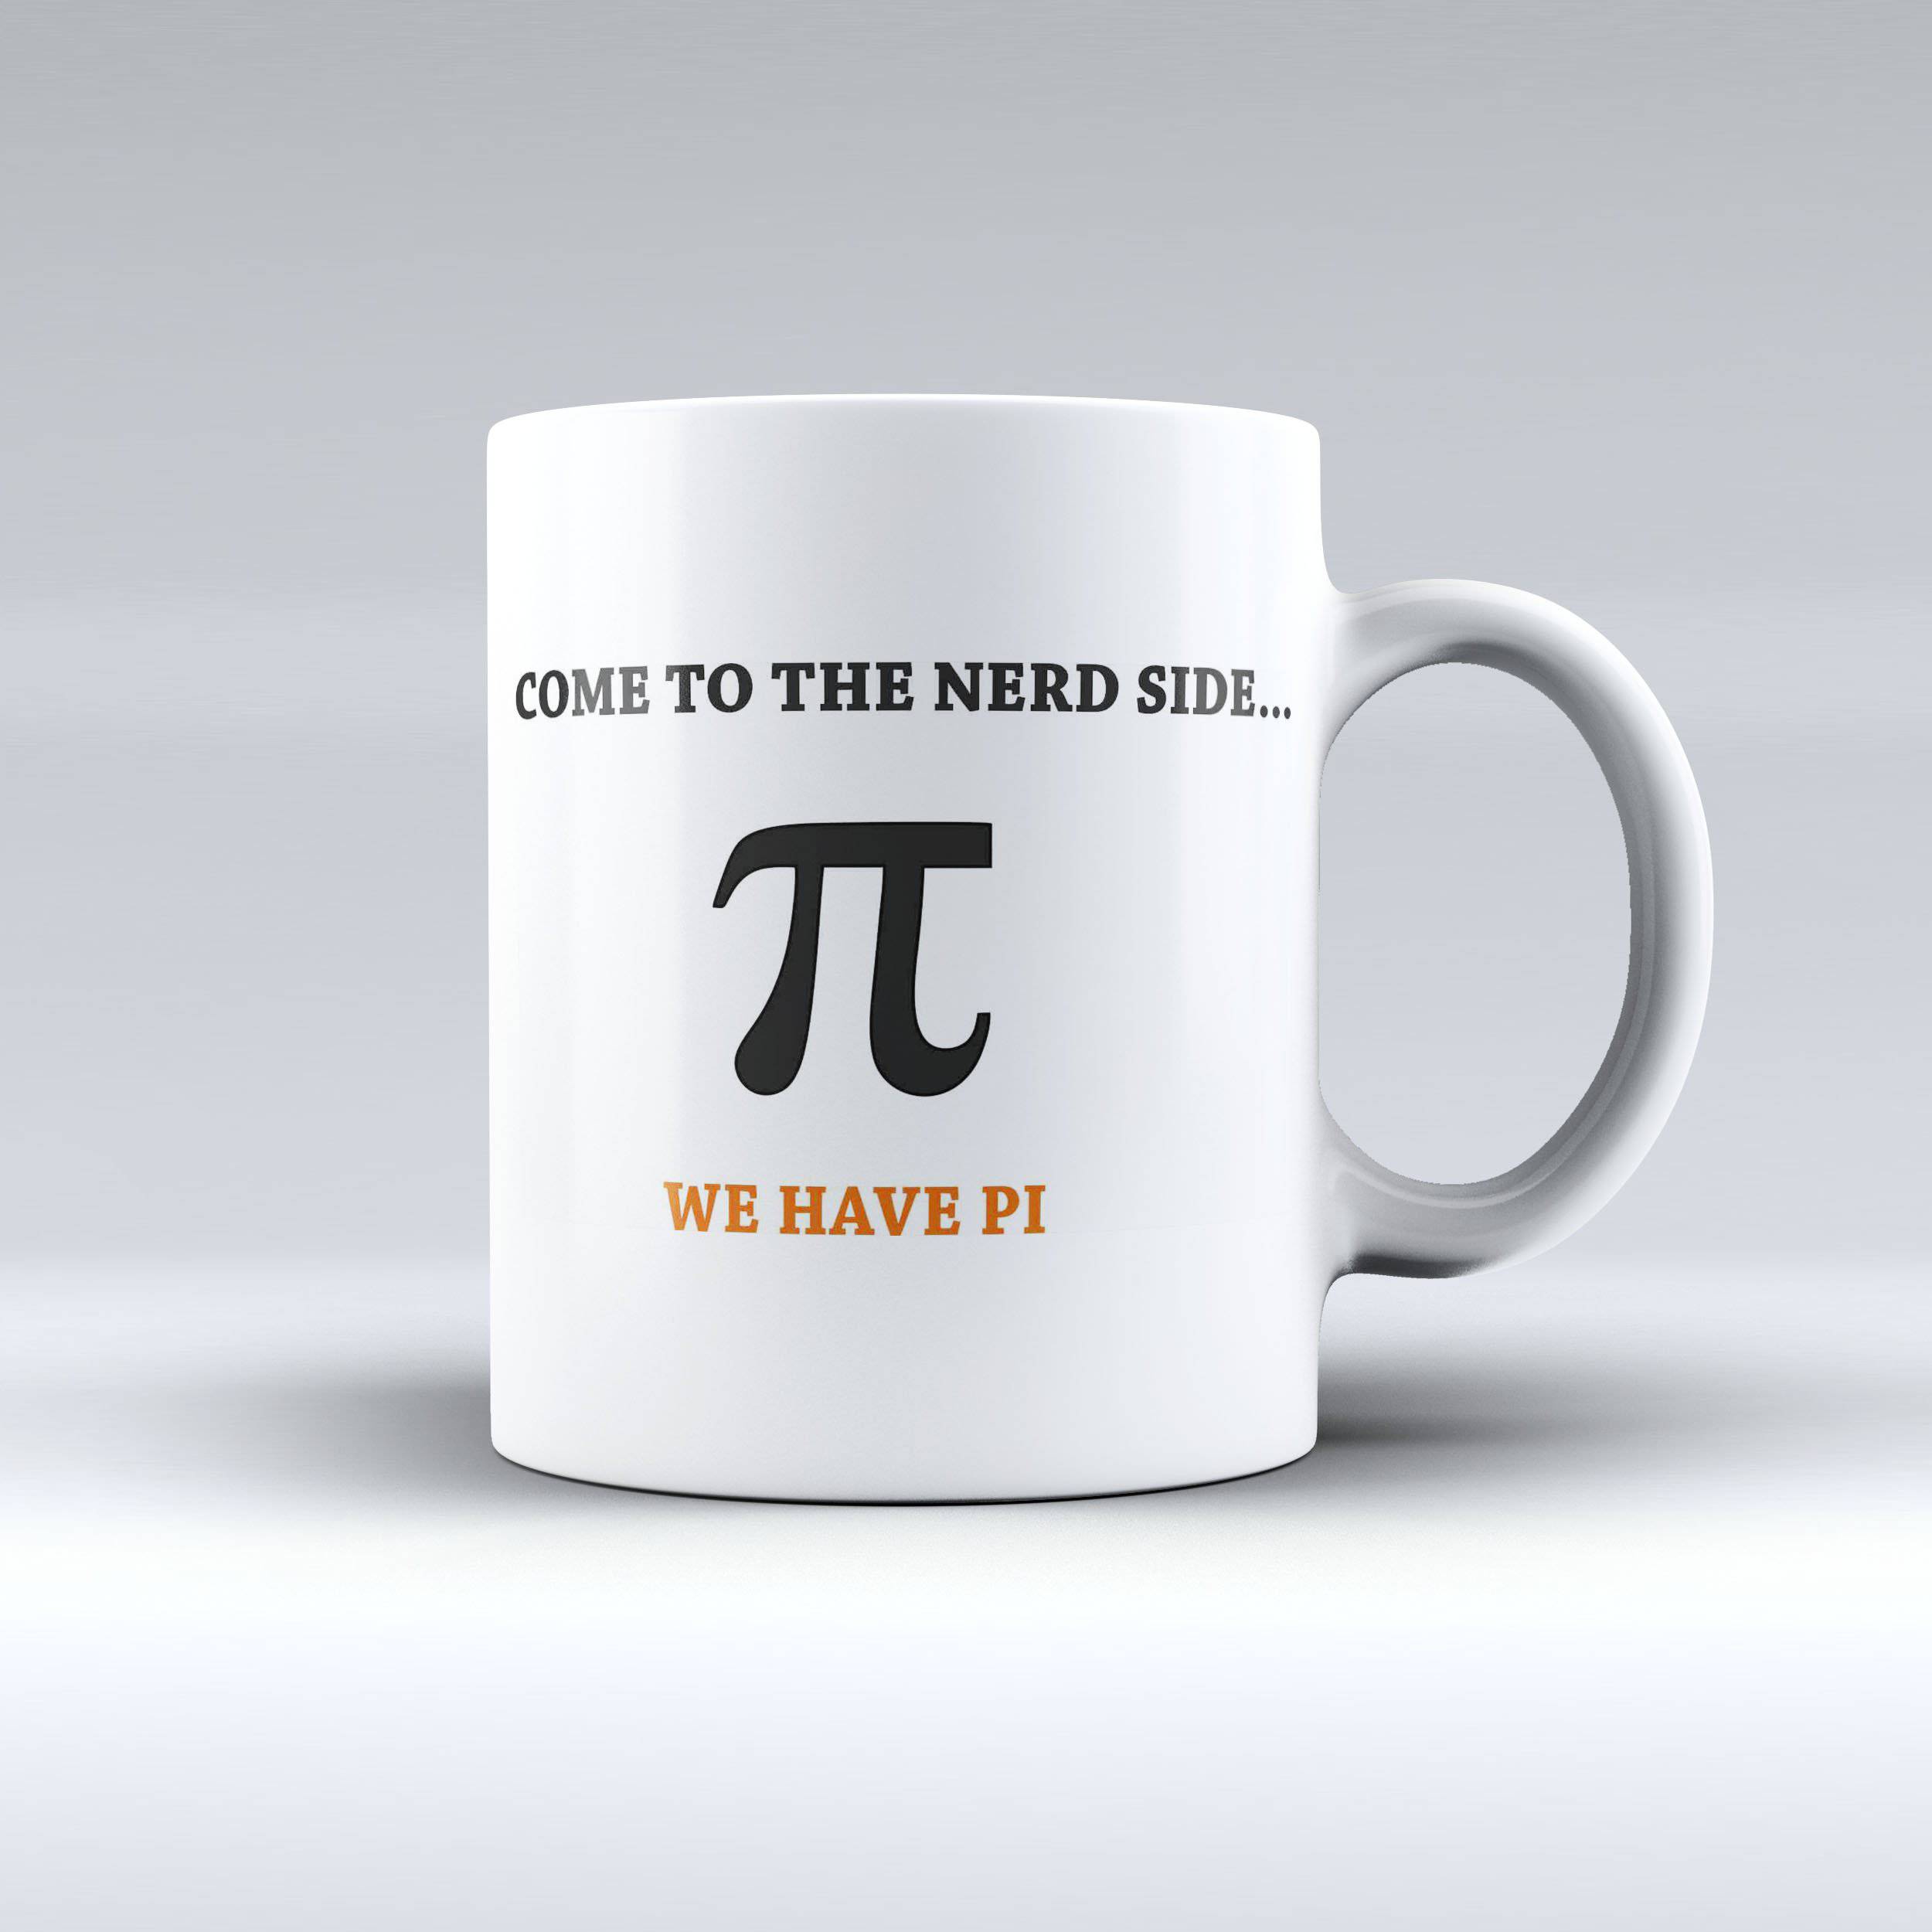 Cute Coffee Mug - Come To The Nerd Side We Have PI - 150TEES.COM - 150 TEES GIFTS & MORE